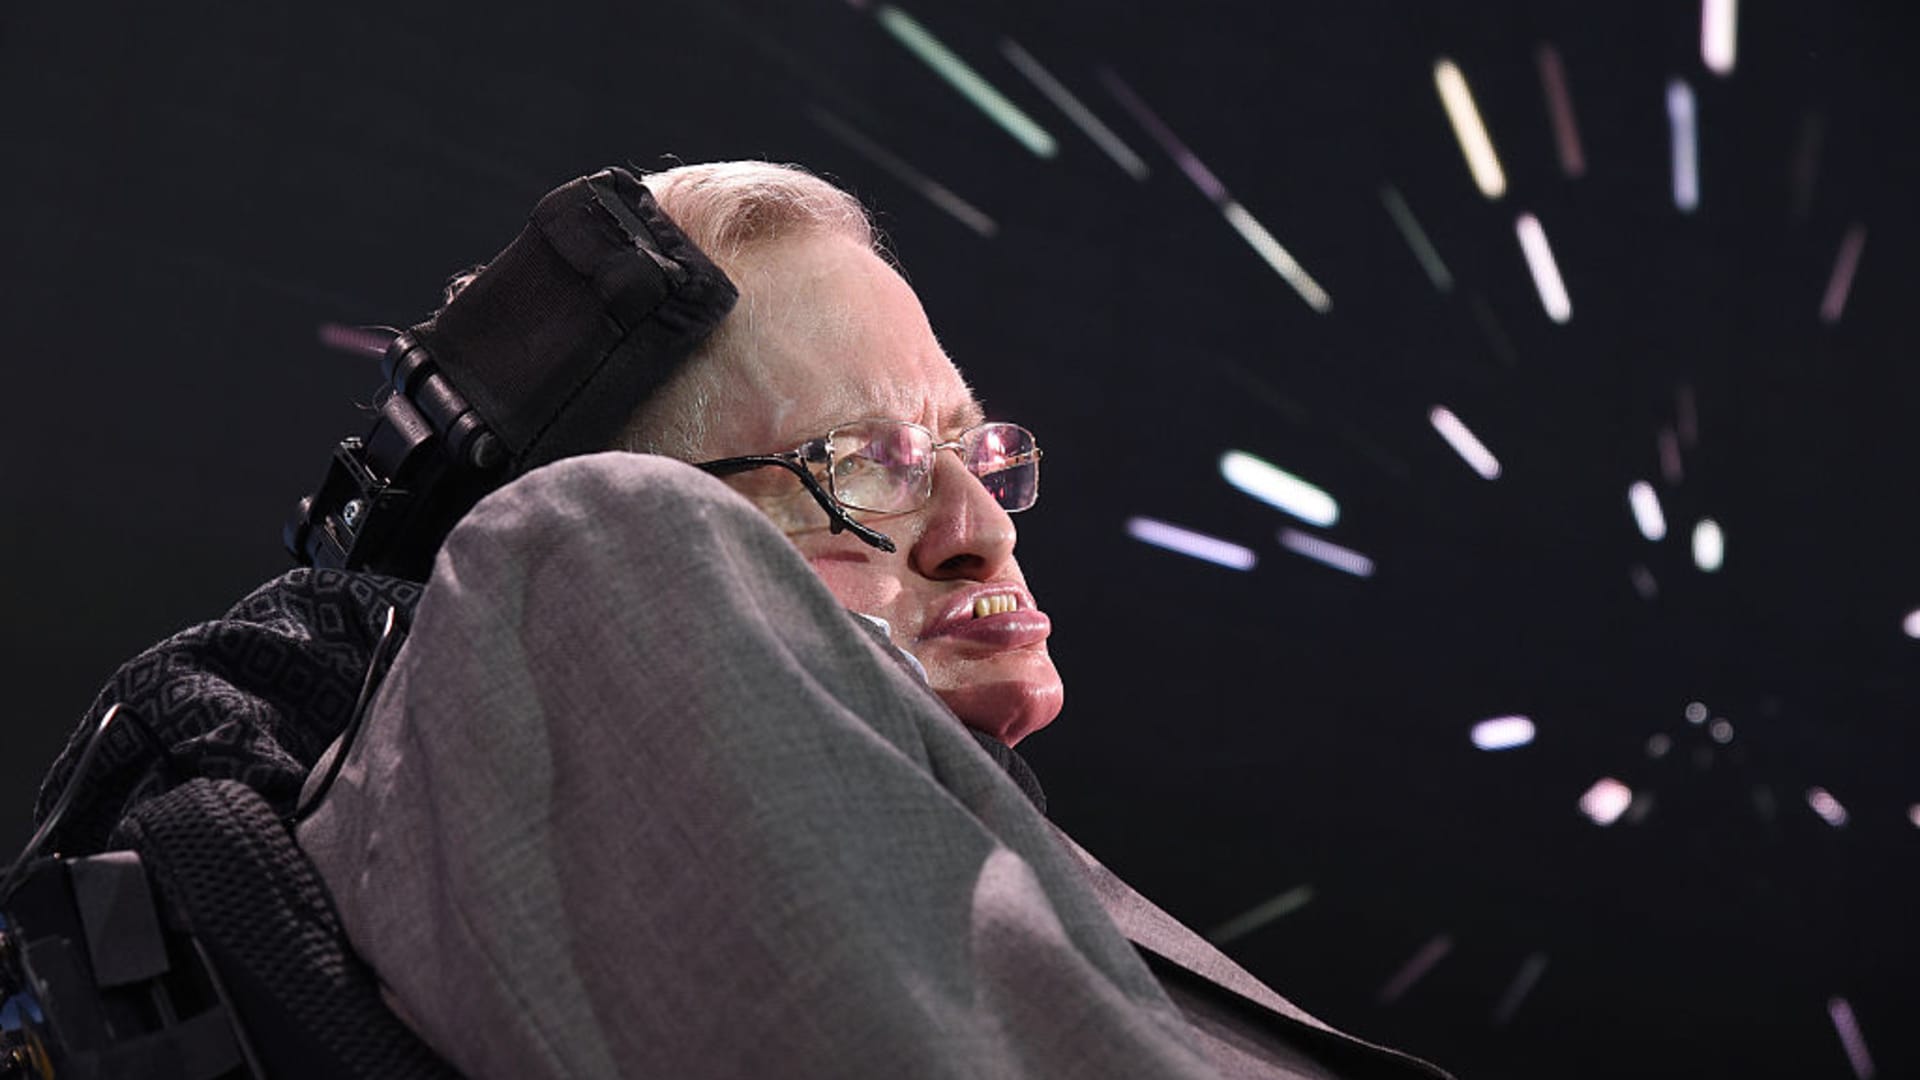 Stephen Hawking says AI could be 'worst event' in civilization